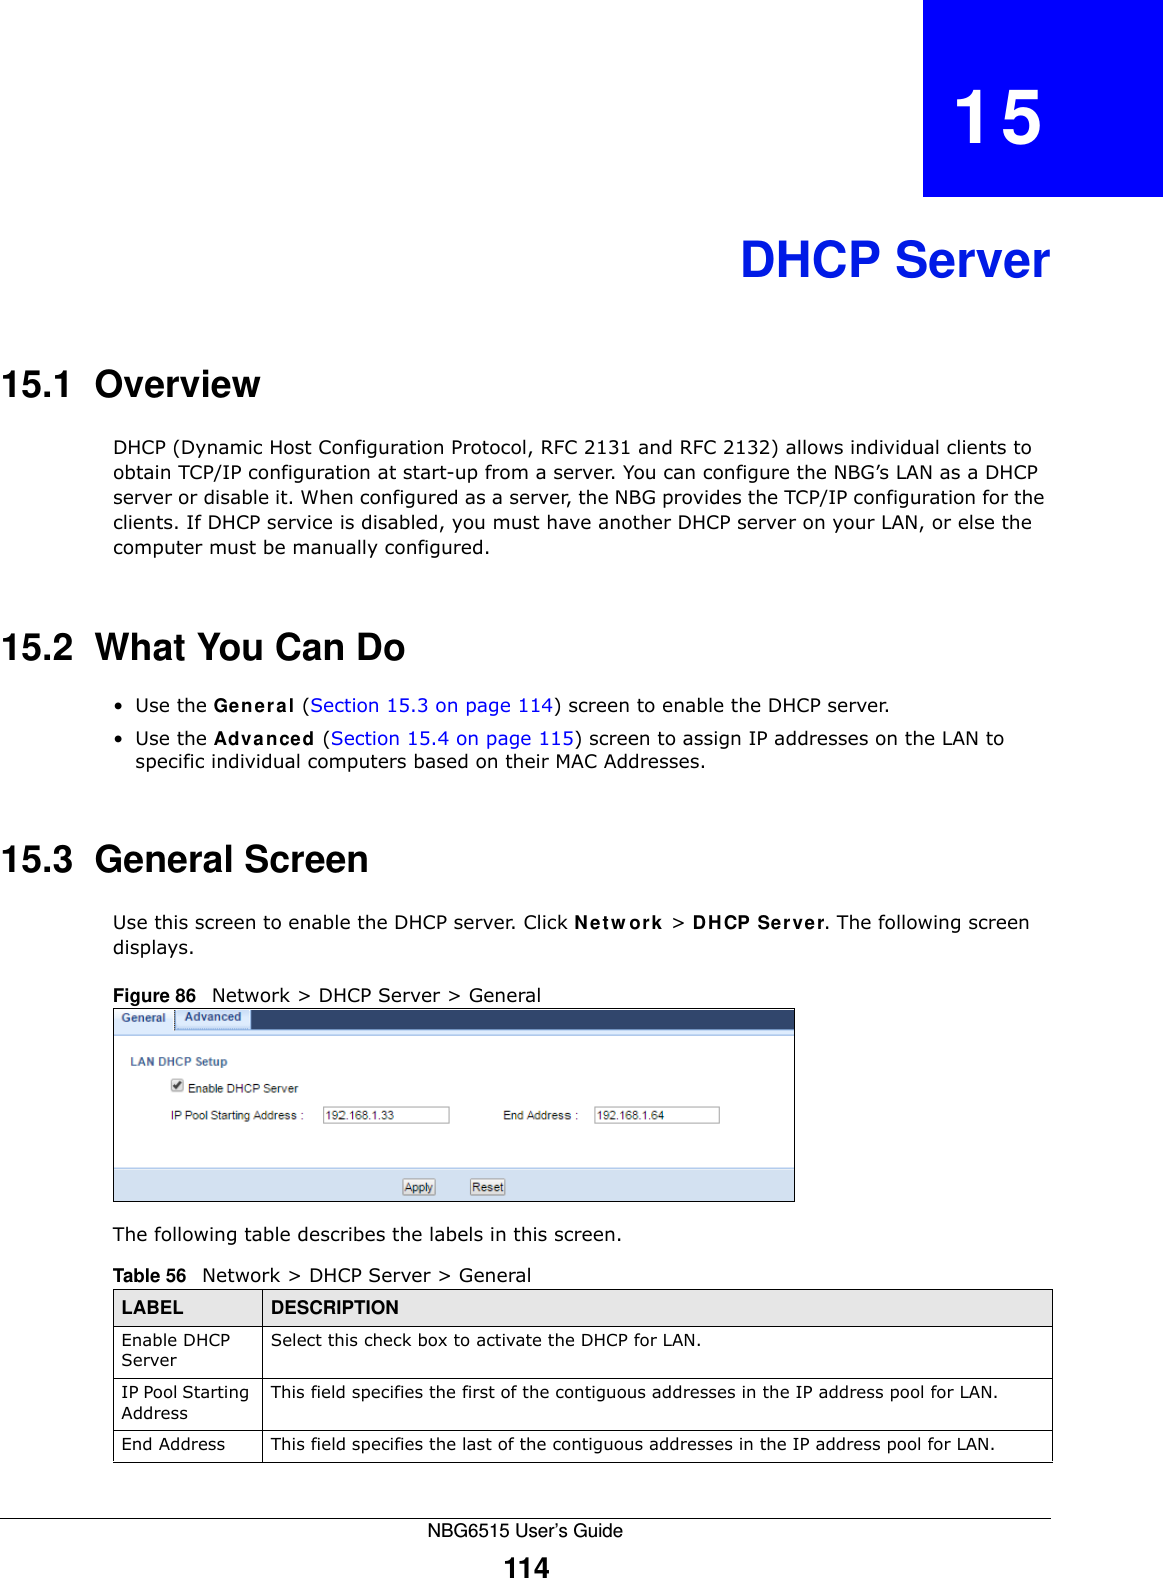 NBG6515 User’s Guide114CHAPTER   15DHCP Server15.1  OverviewDHCP (Dynamic Host Configuration Protocol, RFC 2131 and RFC 2132) allows individual clients to obtain TCP/IP configuration at start-up from a server. You can configure the NBG’s LAN as a DHCP server or disable it. When configured as a server, the NBG provides the TCP/IP configuration for the clients. If DHCP service is disabled, you must have another DHCP server on your LAN, or else the computer must be manually configured.15.2  What You Can Do•Use the General (Section 15.3 on page 114) screen to enable the DHCP server.•Use the Advanced (Section 15.4 on page 115) screen to assign IP addresses on the LAN to specific individual computers based on their MAC Addresses.15.3  General ScreenUse this screen to enable the DHCP server. Click Network &gt; DHCP Server. The following screen displays.Figure 86   Network &gt; DHCP Server &gt; General   The following table describes the labels in this screen.Table 56   Network &gt; DHCP Server &gt; General LABEL DESCRIPTIONEnable DHCP ServerSelect this check box to activate the DHCP for LAN.IP Pool Starting AddressThis field specifies the first of the contiguous addresses in the IP address pool for LAN.End Address This field specifies the last of the contiguous addresses in the IP address pool for LAN.